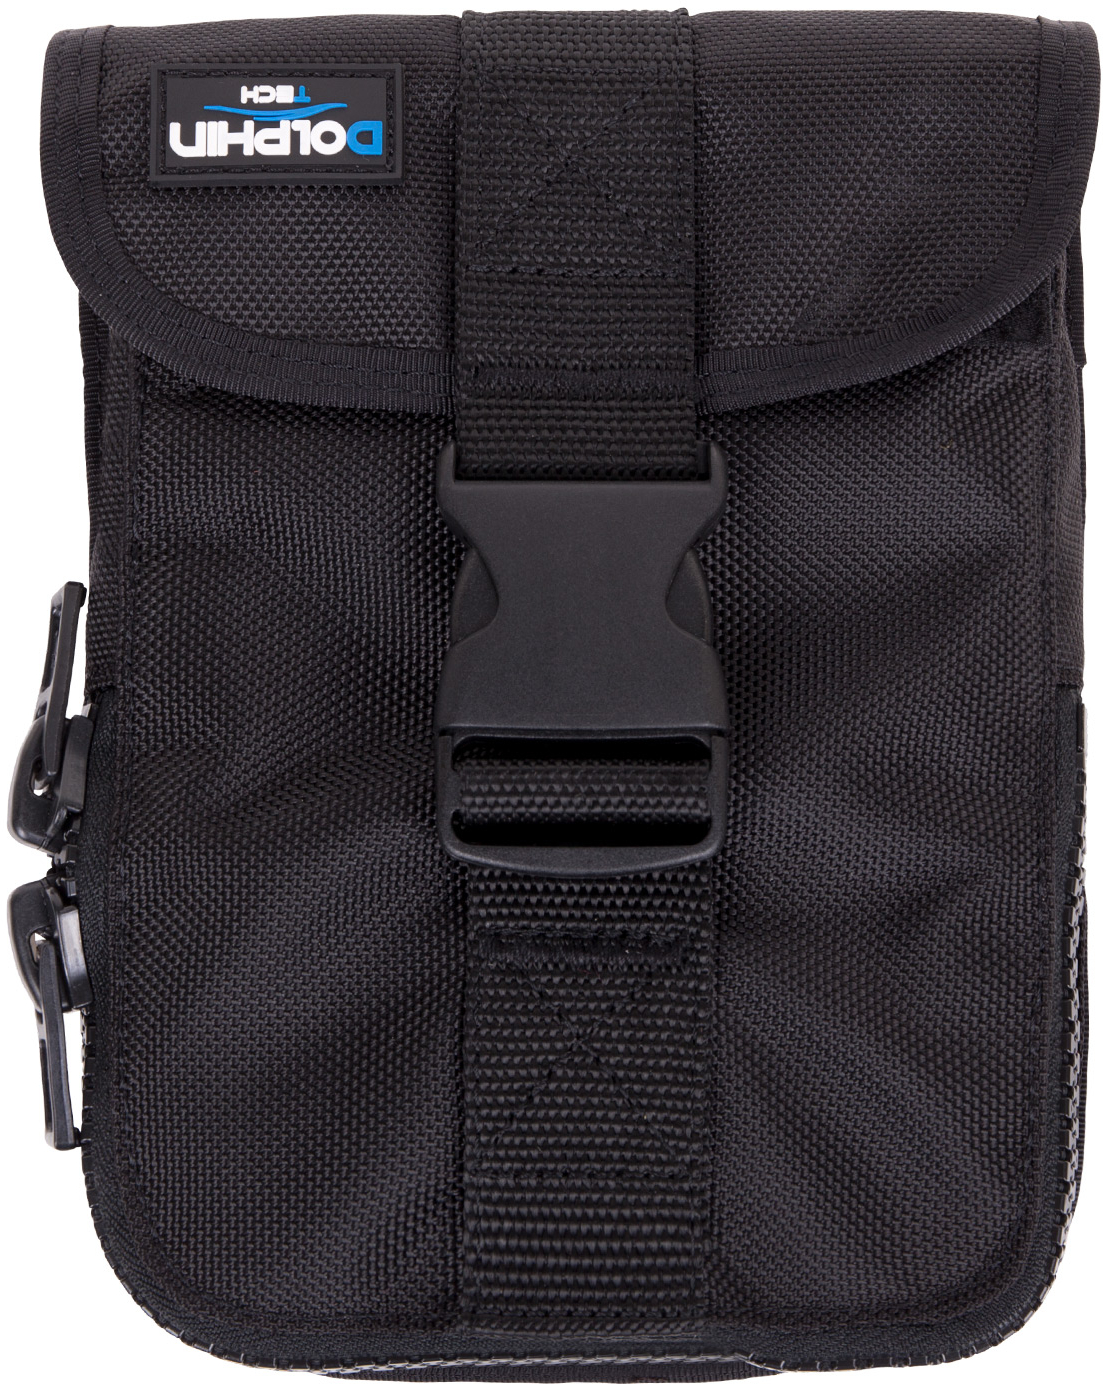 Dolphin Tech By IST Technical Diving 15.4lb Weight Pockets (EACH)